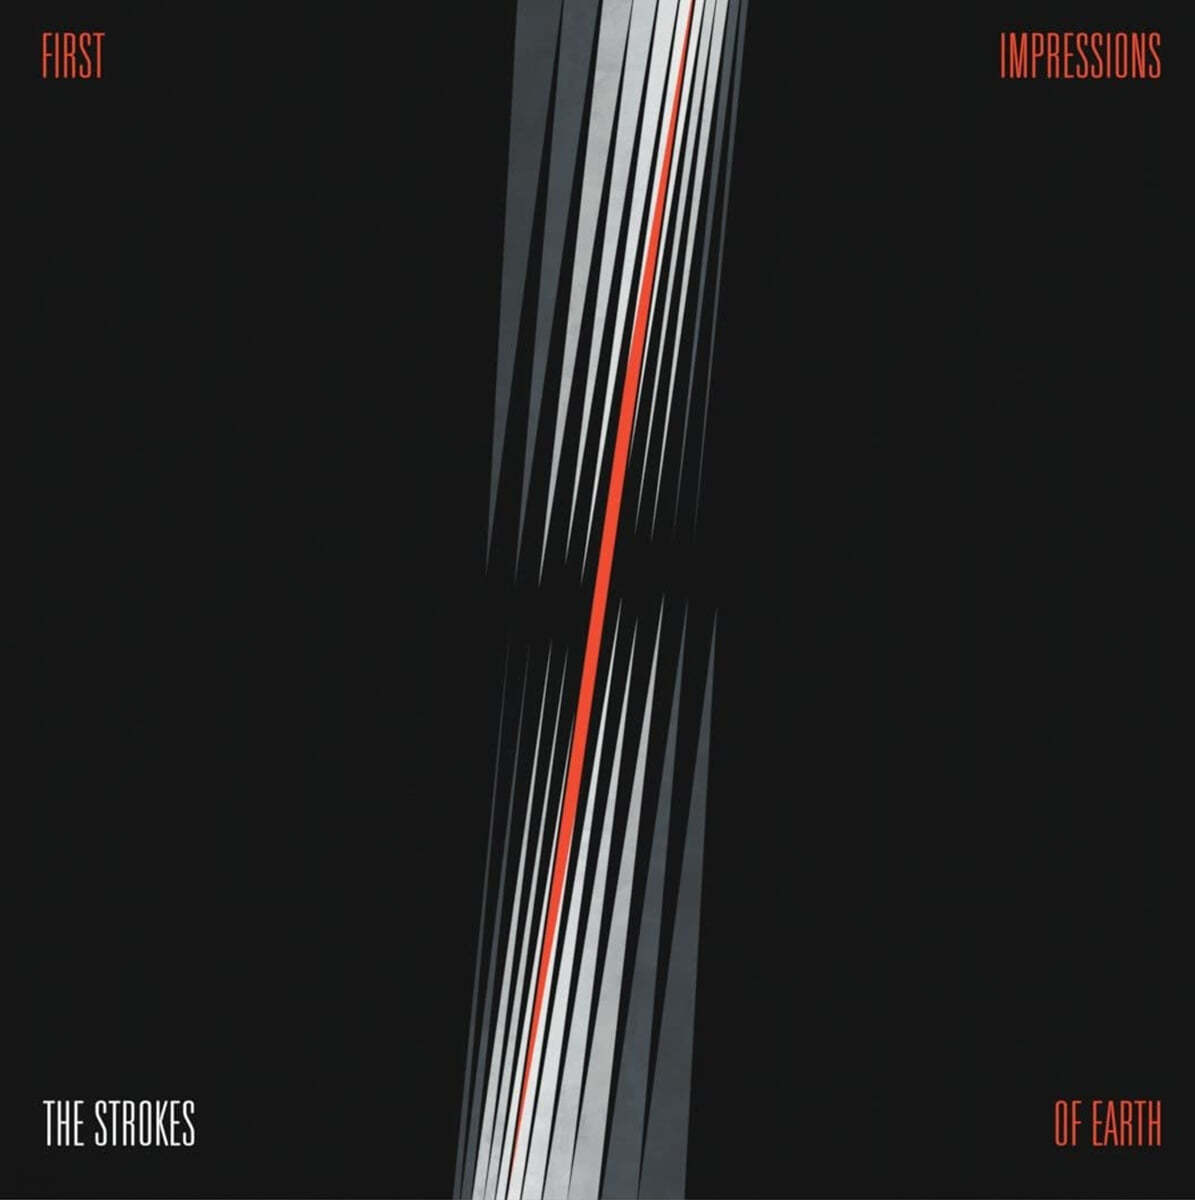 The Strokes (스트록스) - 3집 First Impressions Of Earth [레드 컬러 LP]